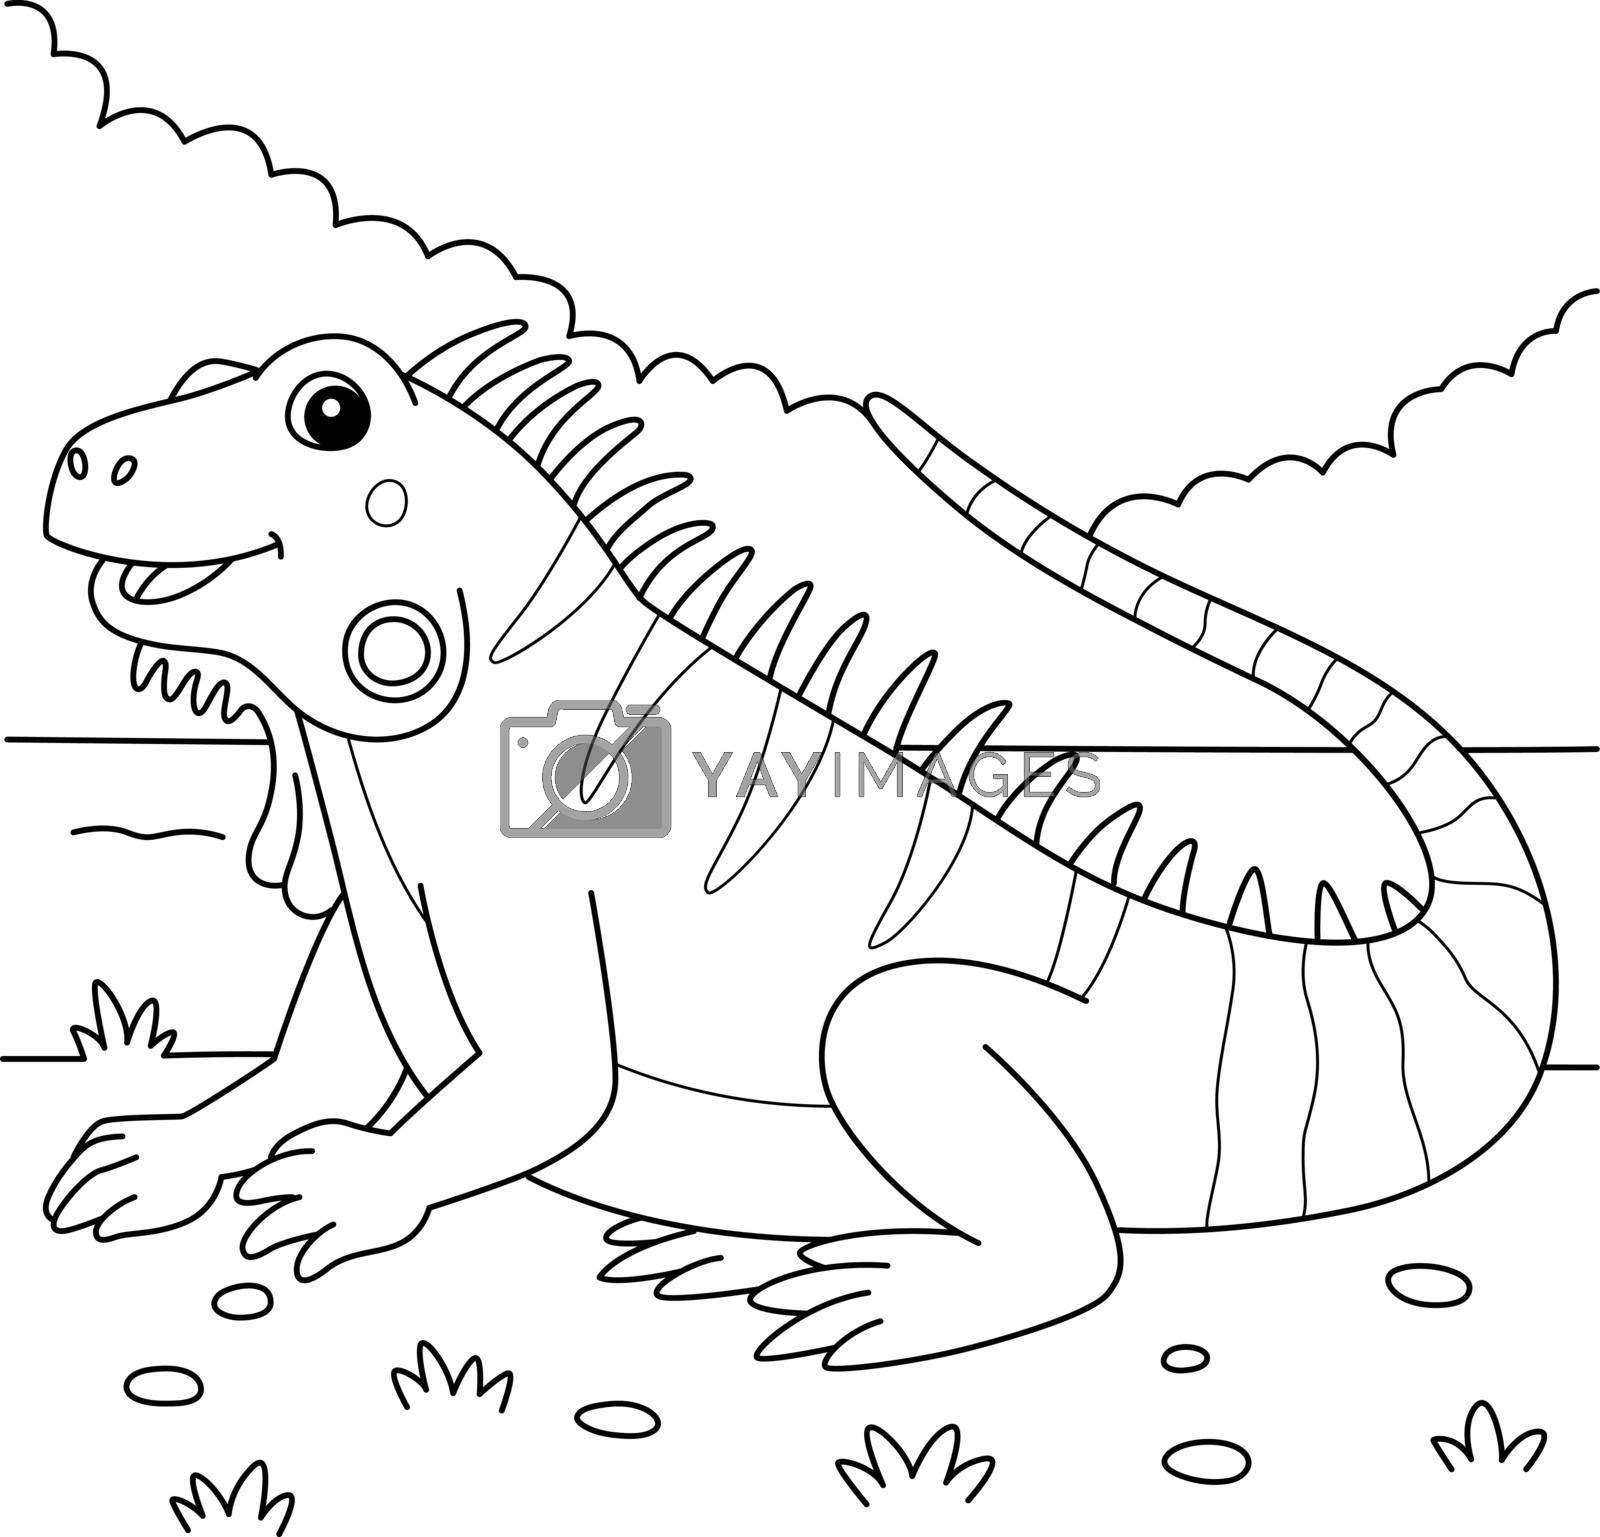 Royalty free image of Iguana Animal Coloring Page for Kids by abbydesign